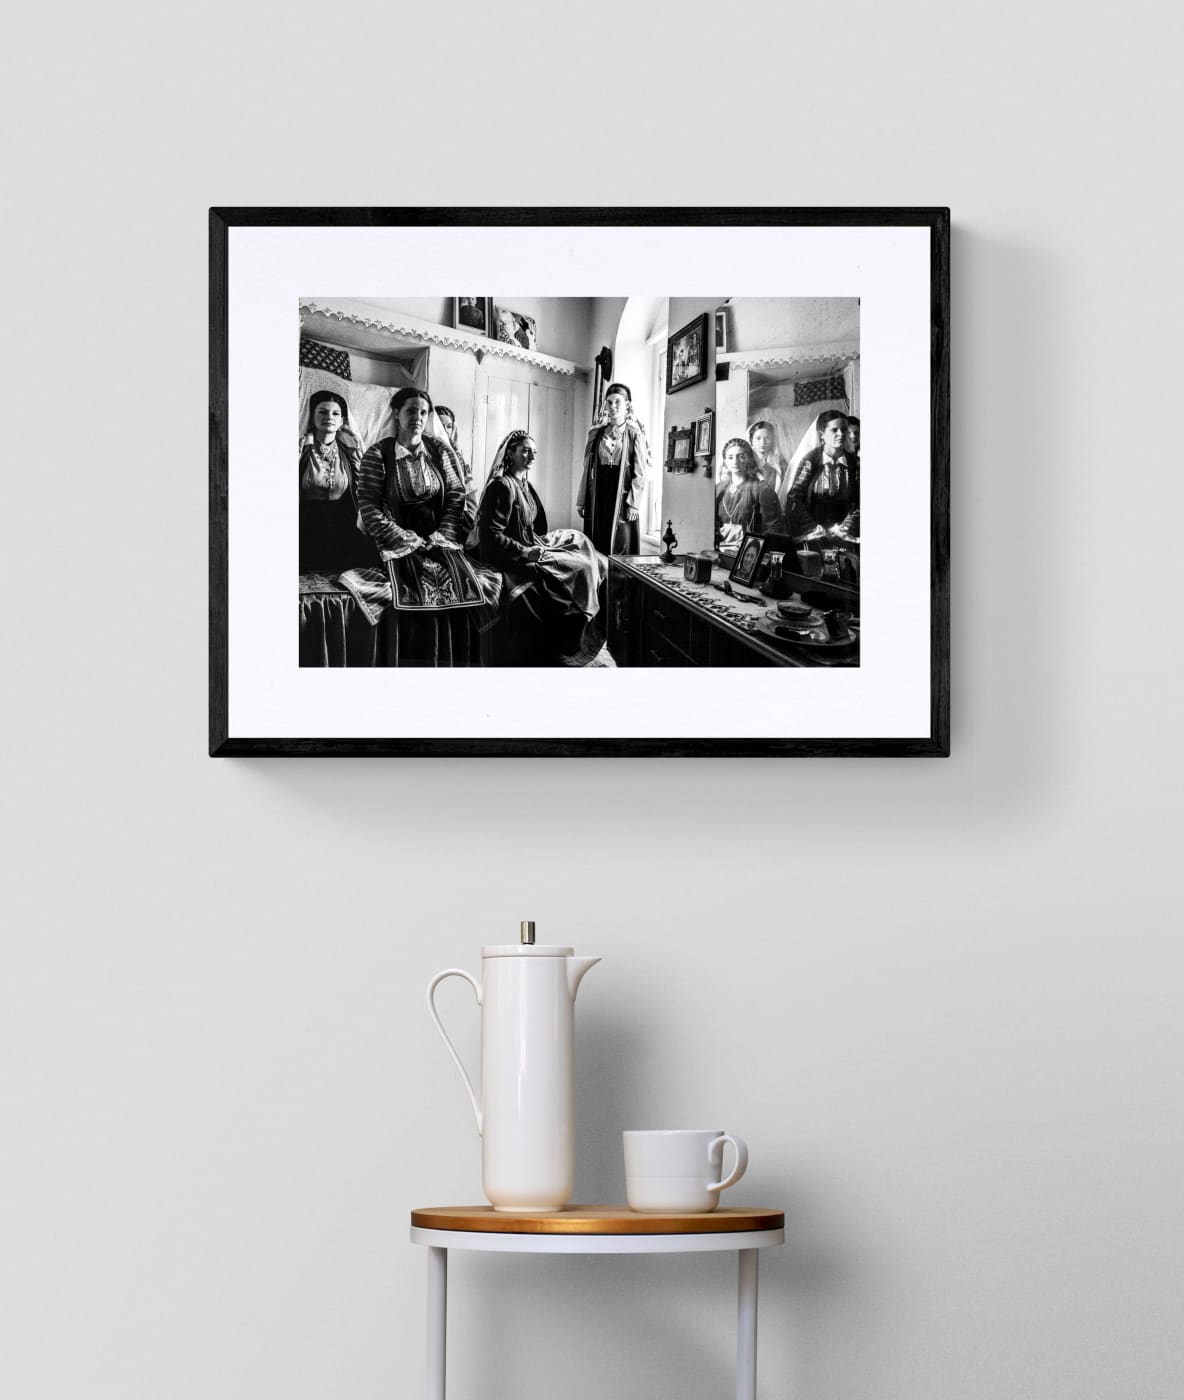 Black and White Photography Wall Art Greece | Costumes of Platanos in a traditional local bedroom Nafpaktos Aetoloacarnanea Greece by George Tatakis - single framed photo